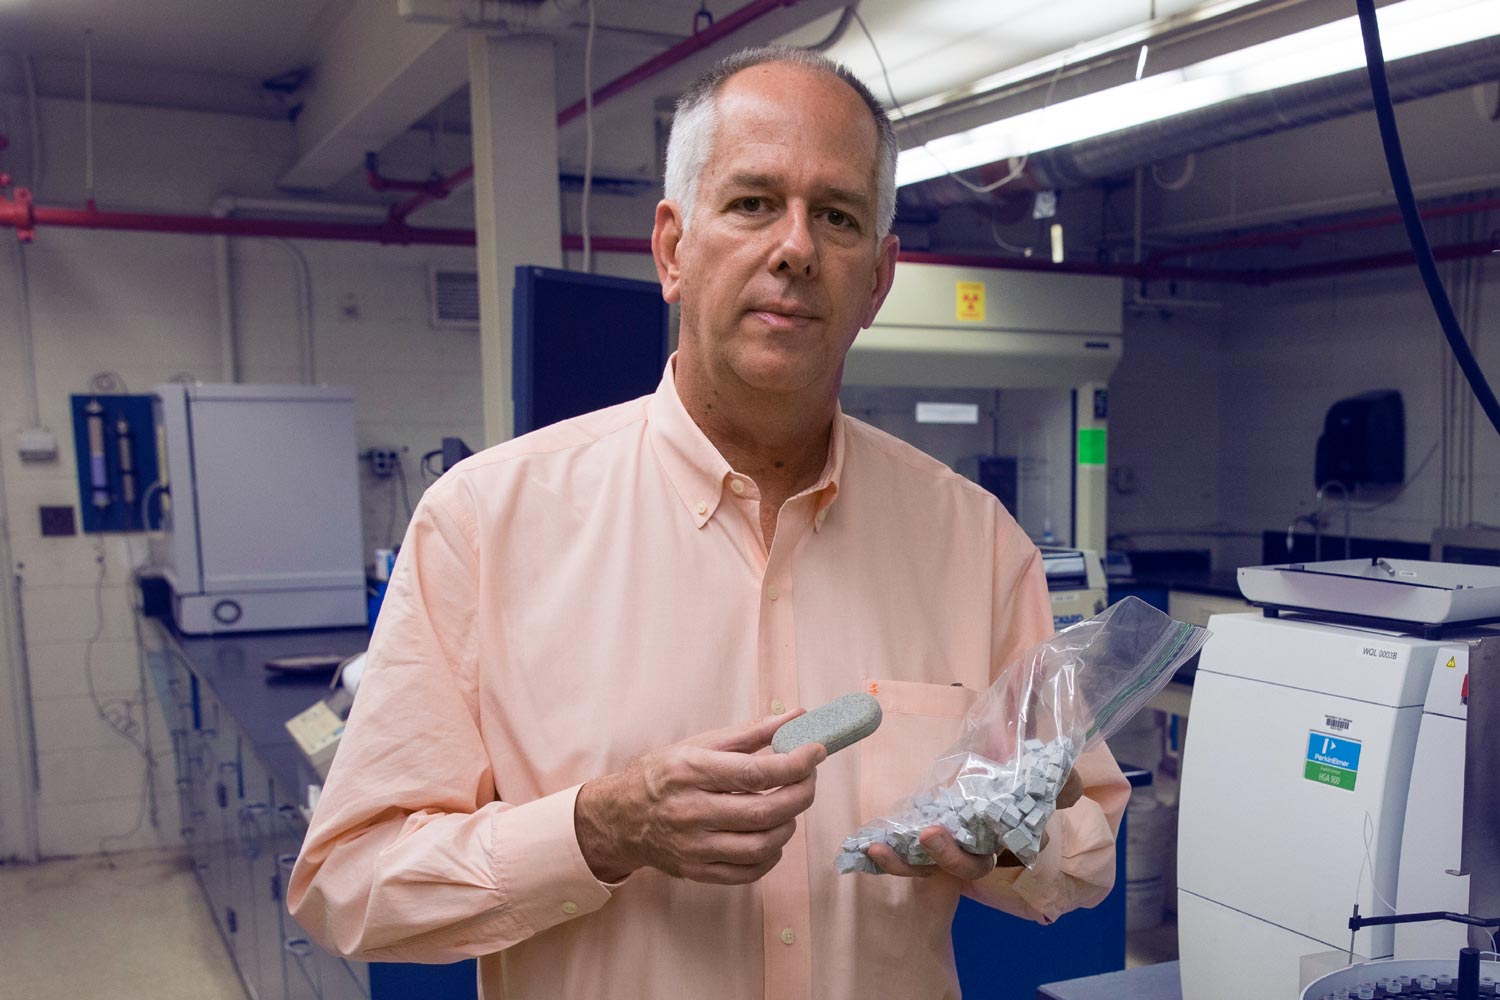 Jim Smith holding the oval MadiDrop tablet in the lab